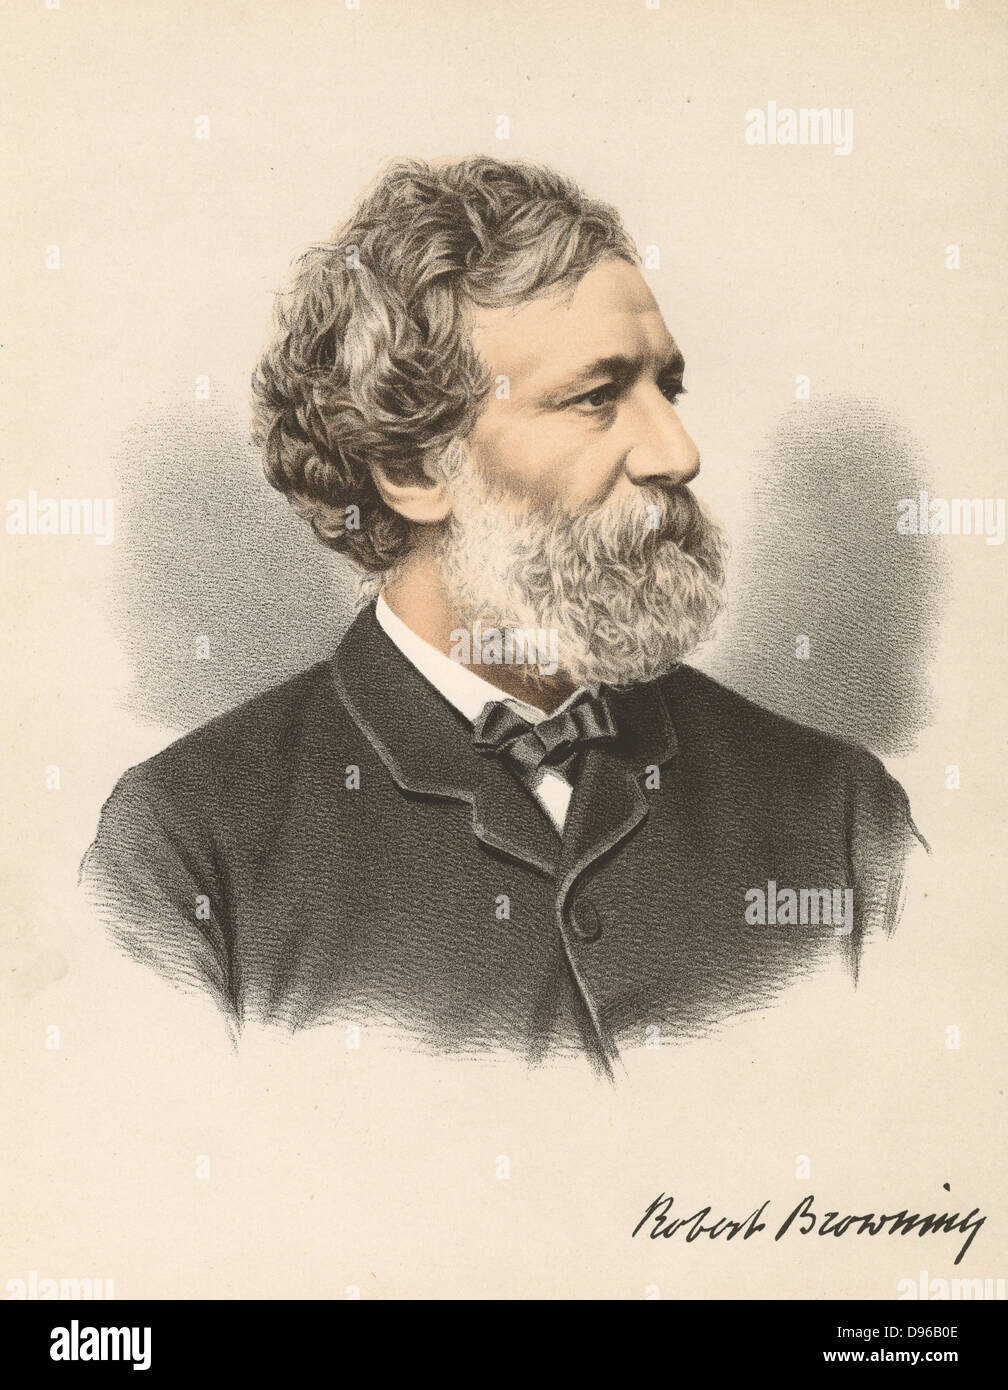 Robert Browning (1812-1889) English poet and dramatist. From 'The Modern Portrait Gallery', Cassell, Petter & Galpin, London c.1880. Tinted lithograph. Stock Photo